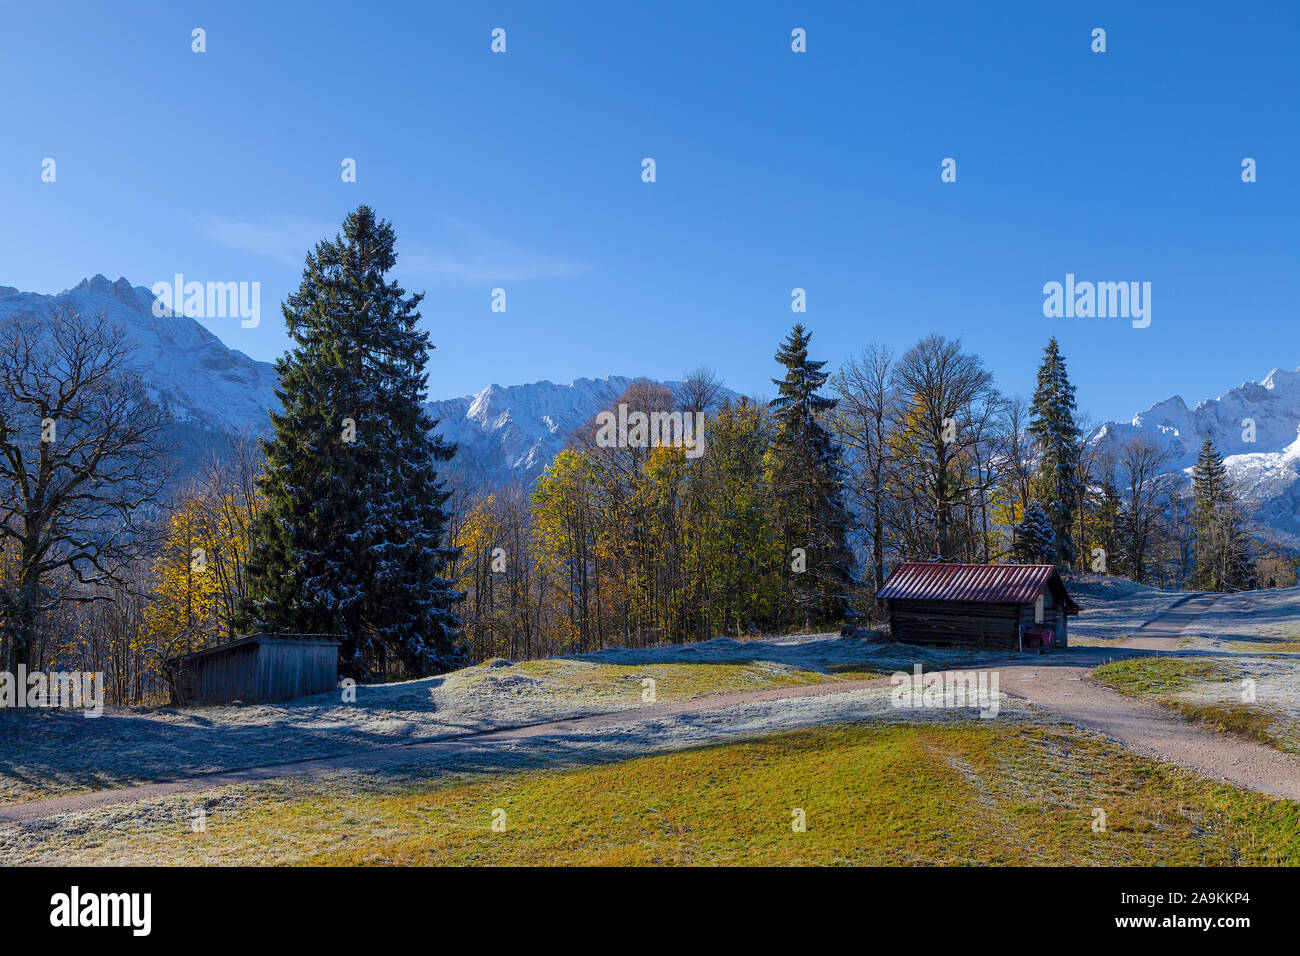 Alpine landscape with coloured trees and white snowy mountains in the background Stock Photo